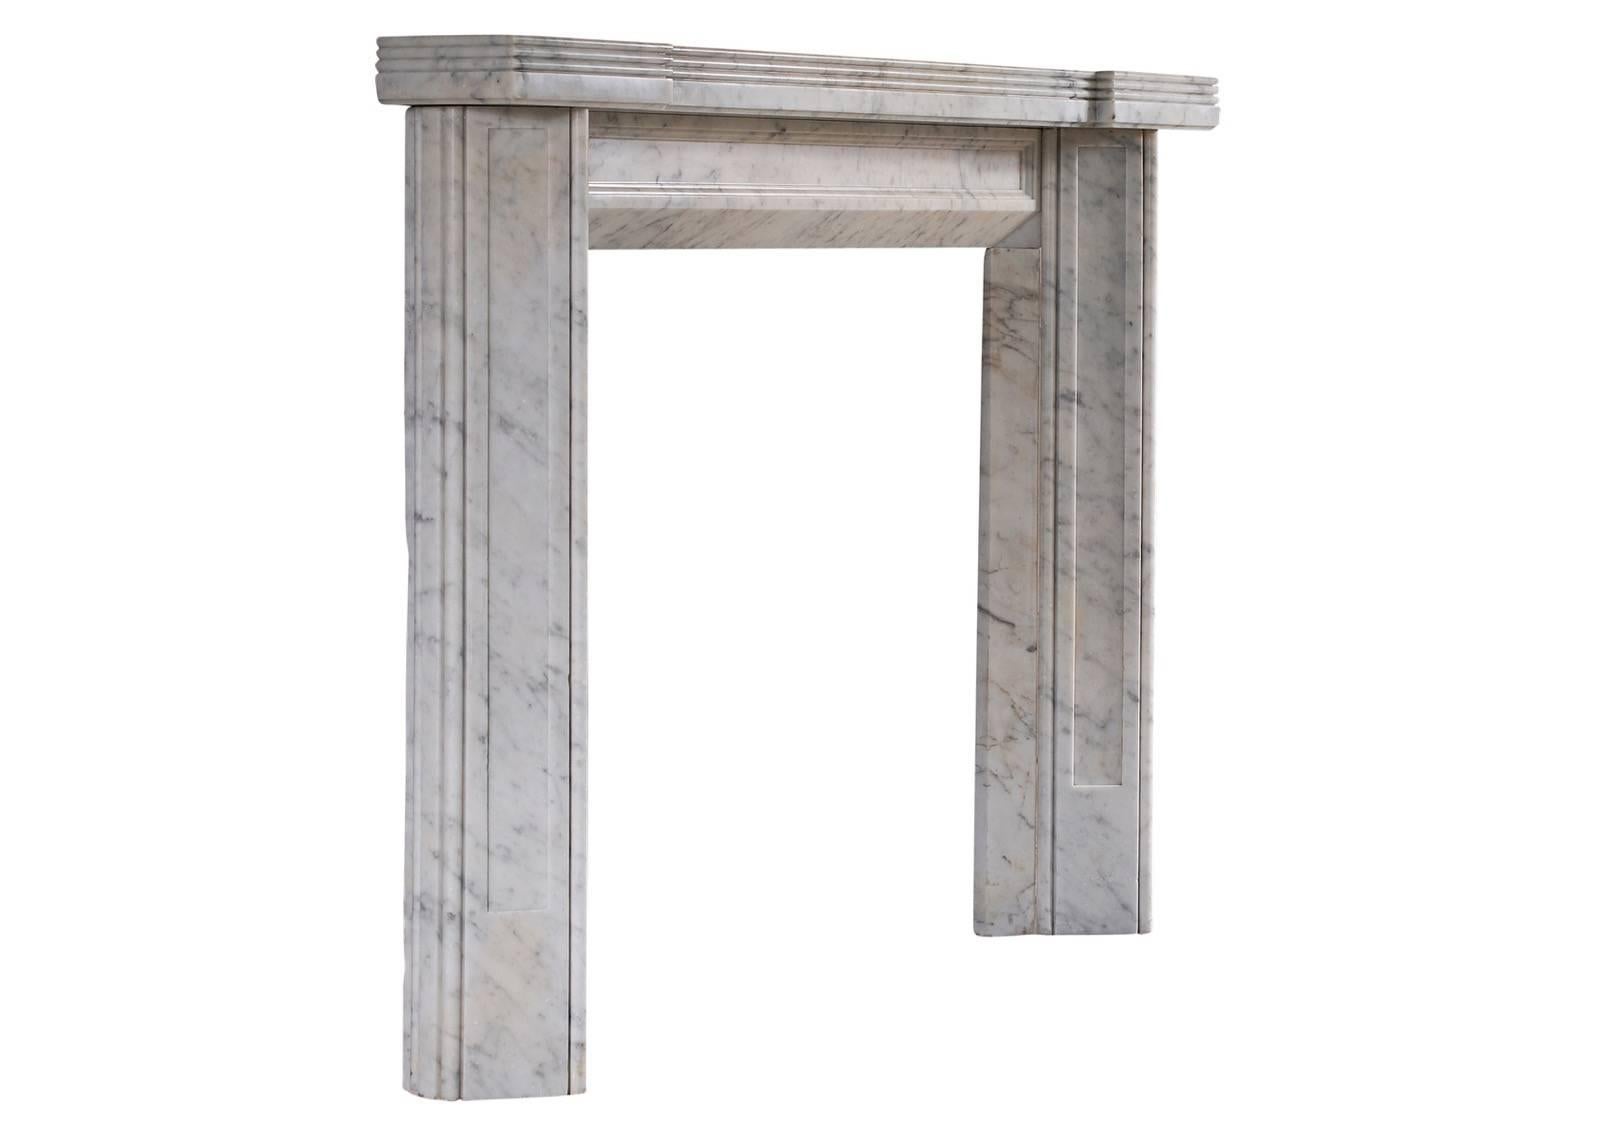 An unusual English Carrara marble fireplace from the Art Deco period. The triangular, panelled jambs surmounted by panelled frieze and reeded shelf. Early 20th century.

Measures: Shelf width 1384 mm 54 ½ in
Overall height 1060 mm 41 ¾